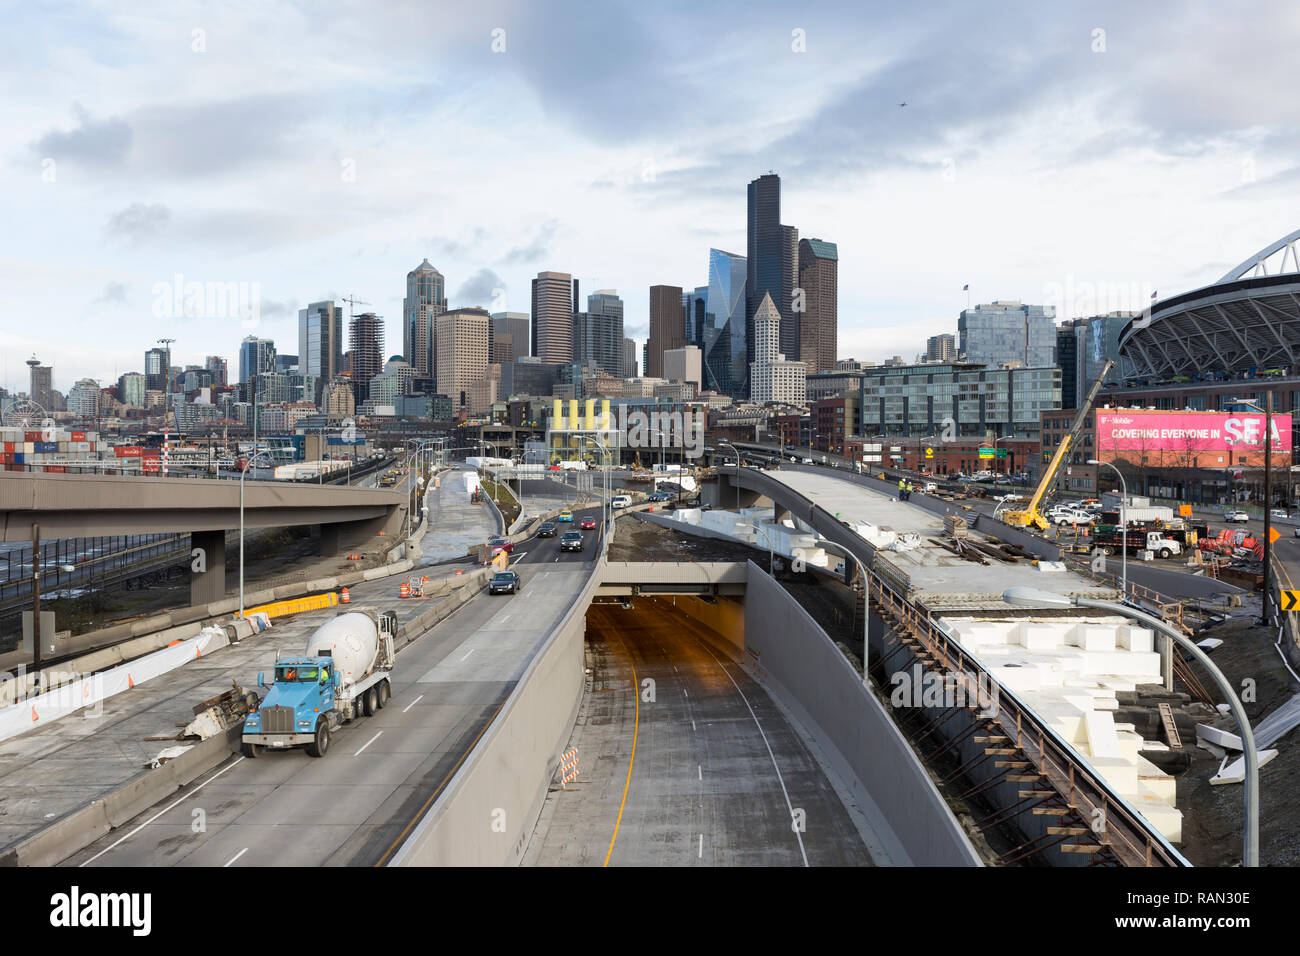 Seattle, Washington, USA. 4th January, 2019. Washington State Department of Transportation prepares to close the first two ramps of the Alaskan Way Viaduct near the south end of the tunnel on January 4 in advance of the highway’s permanent closure. A two-mile long, bored road tunnel is replacing the Alaskan Way Viaduct, carrying State Route 99 under downtown Seattle from the SODO neighborhood to South Lake Union. The viaduct is scheduled to close permanently on January 11 so crews can move State Route 99 from the viaduct to the state-of-the-art tunnel. Credit: Paul Christian Gordon/Alamy Live  Stock Photo